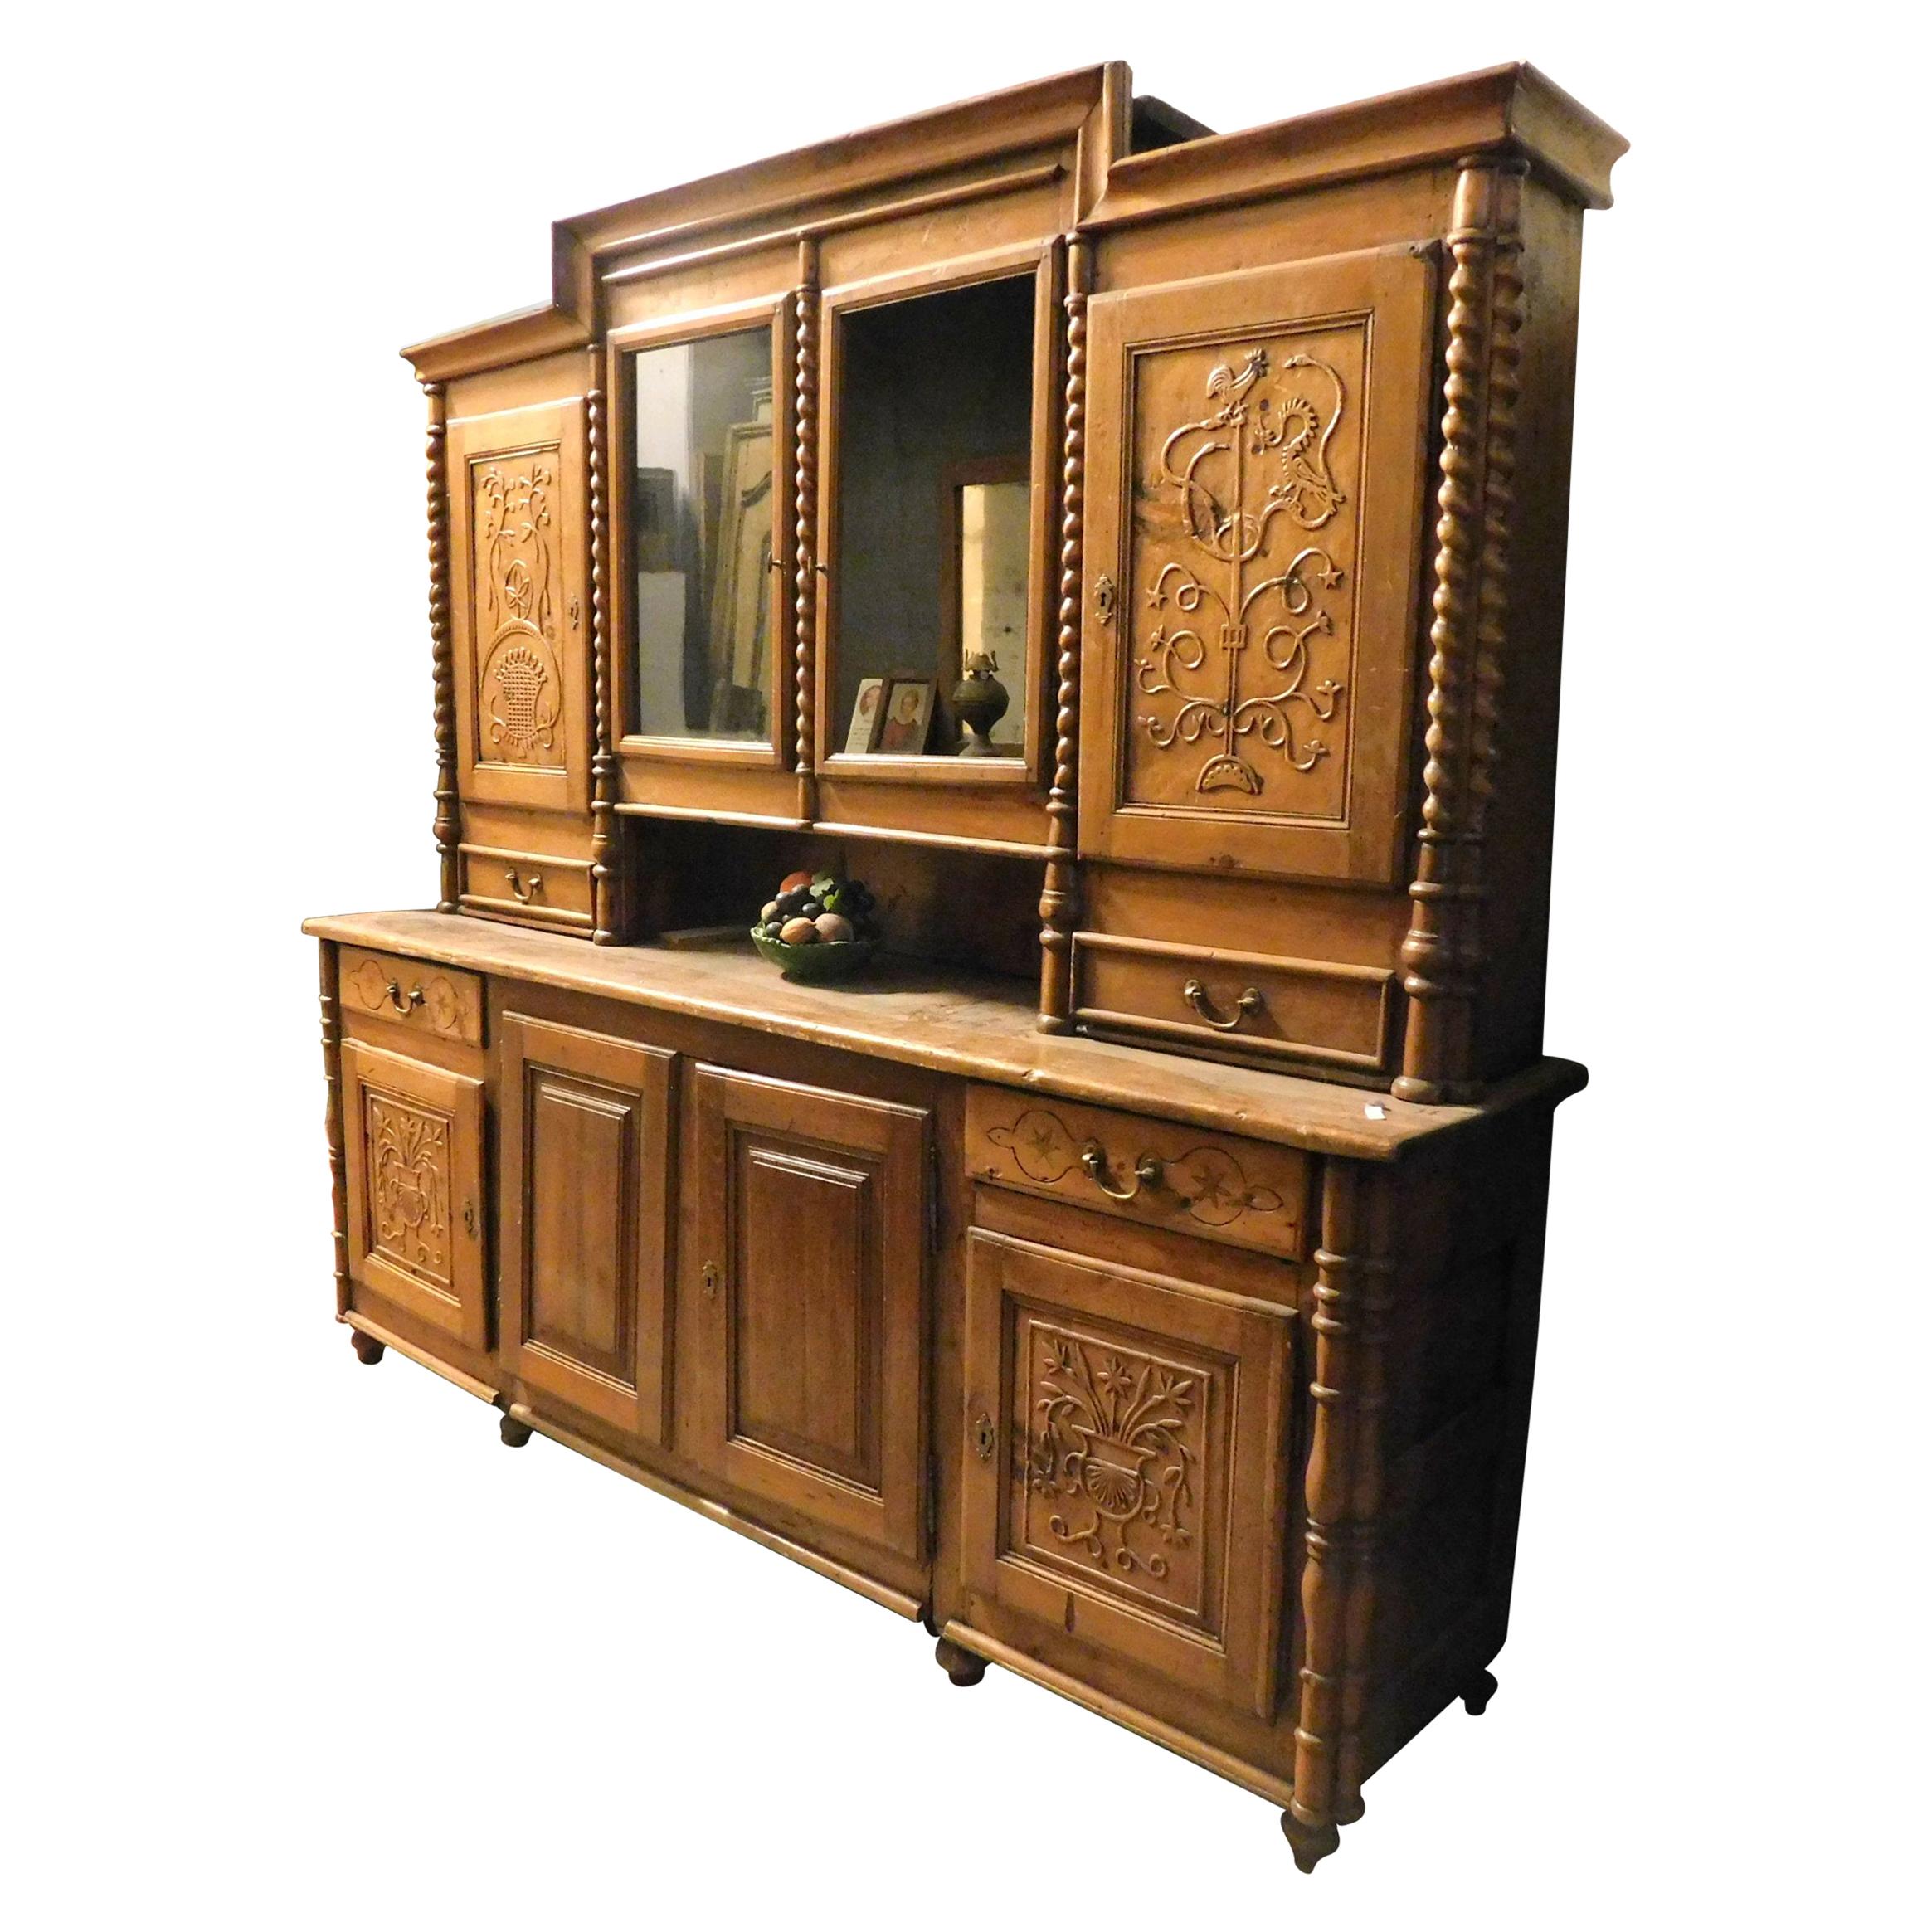 Antique Sideboard, Double Body, Larch Wood, Carved Mountain Theme, 1800, Italy For Sale